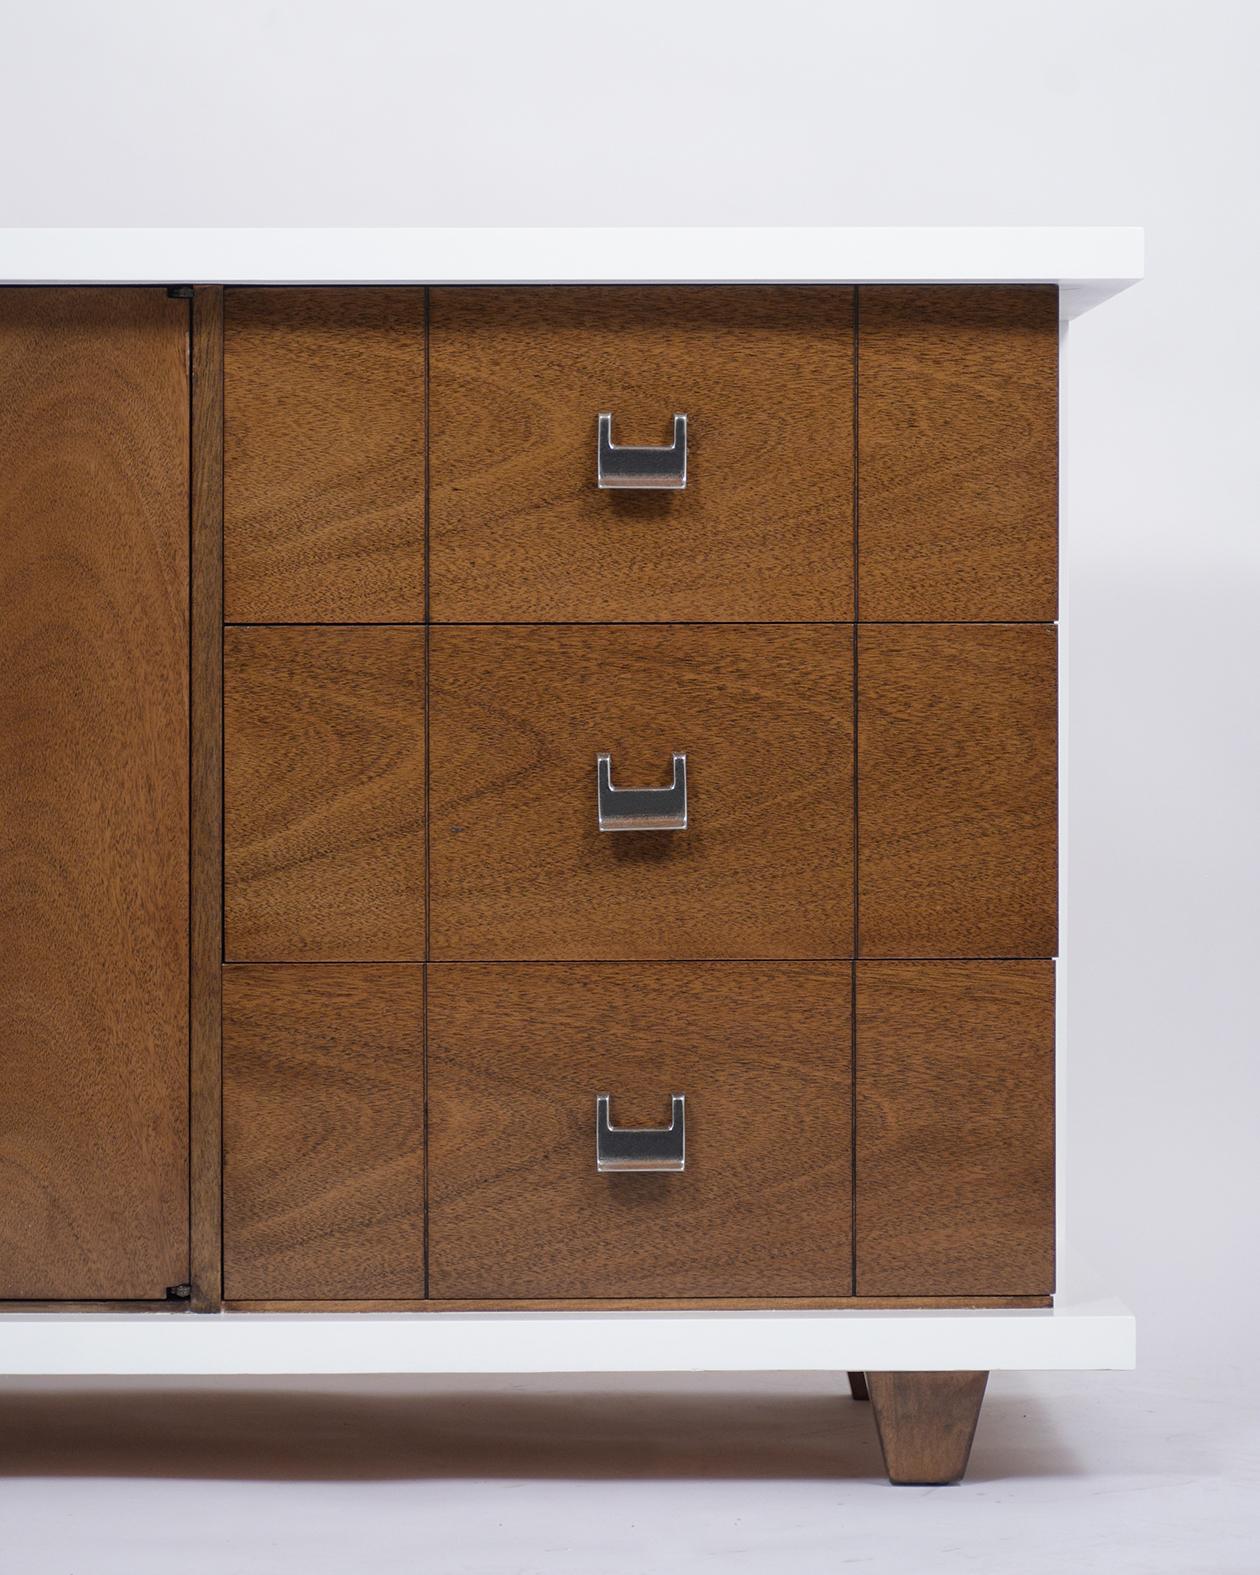 Amsterdam School 1960s Mid-Century Modern Walnut Credenza with White Lacquer Finish For Sale